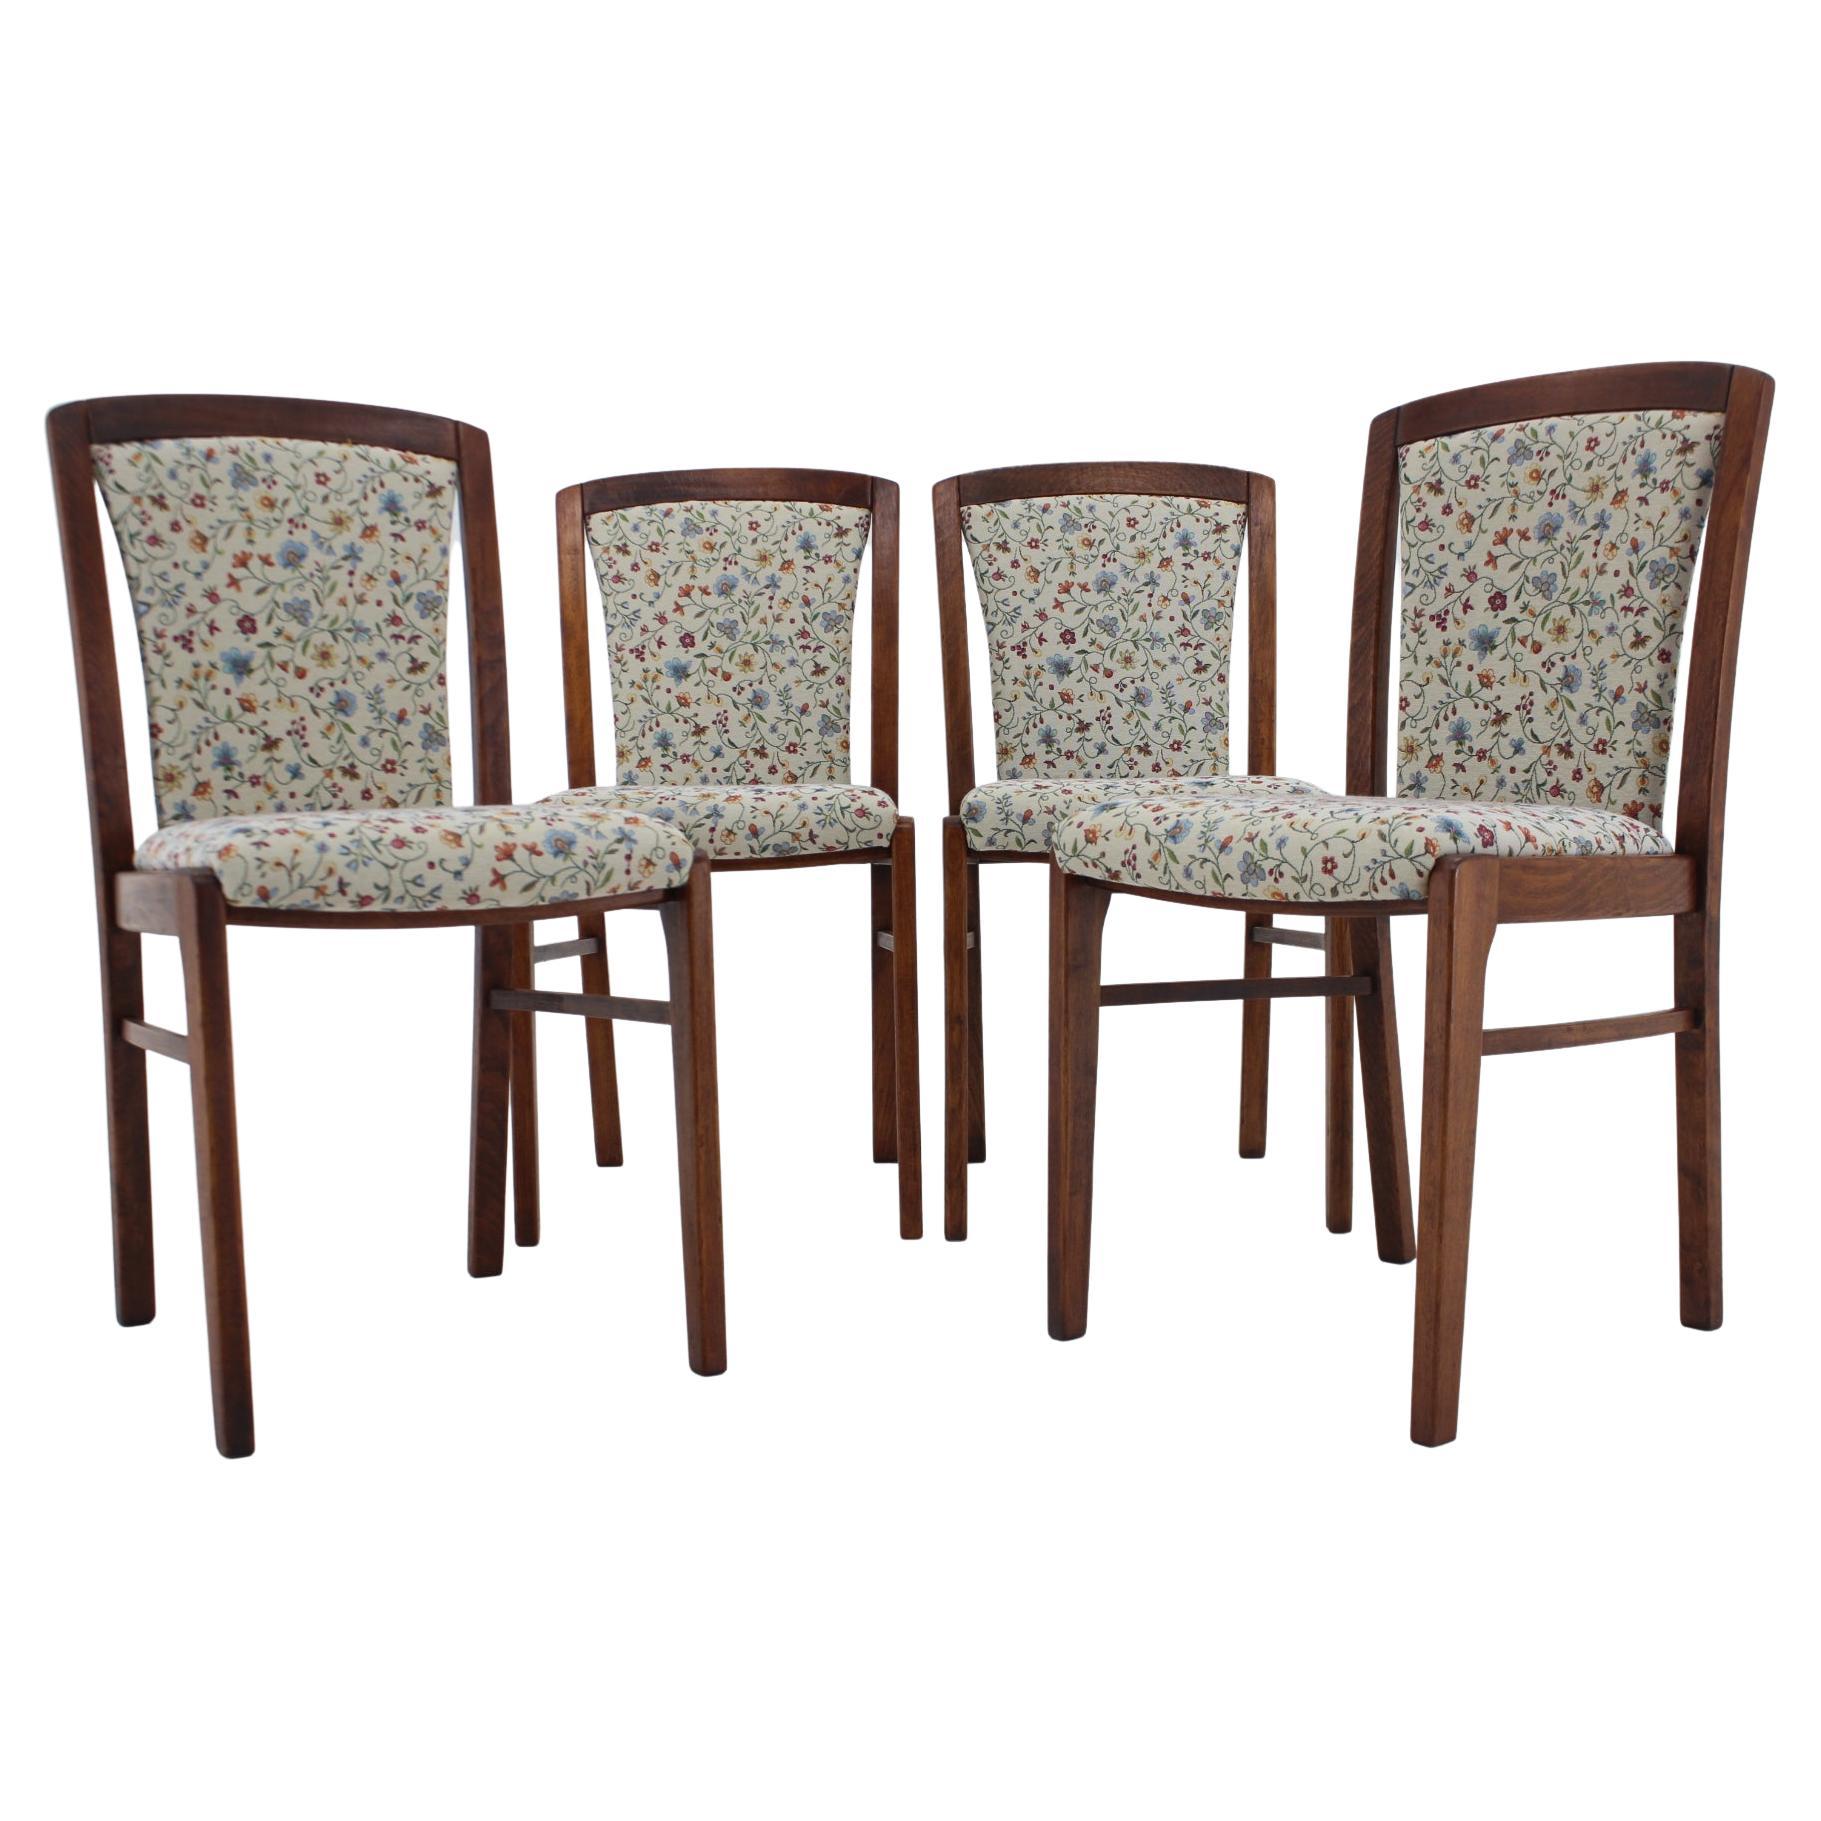 1950s Set of Four Beech Dining Chair, Czechoslovakia For Sale